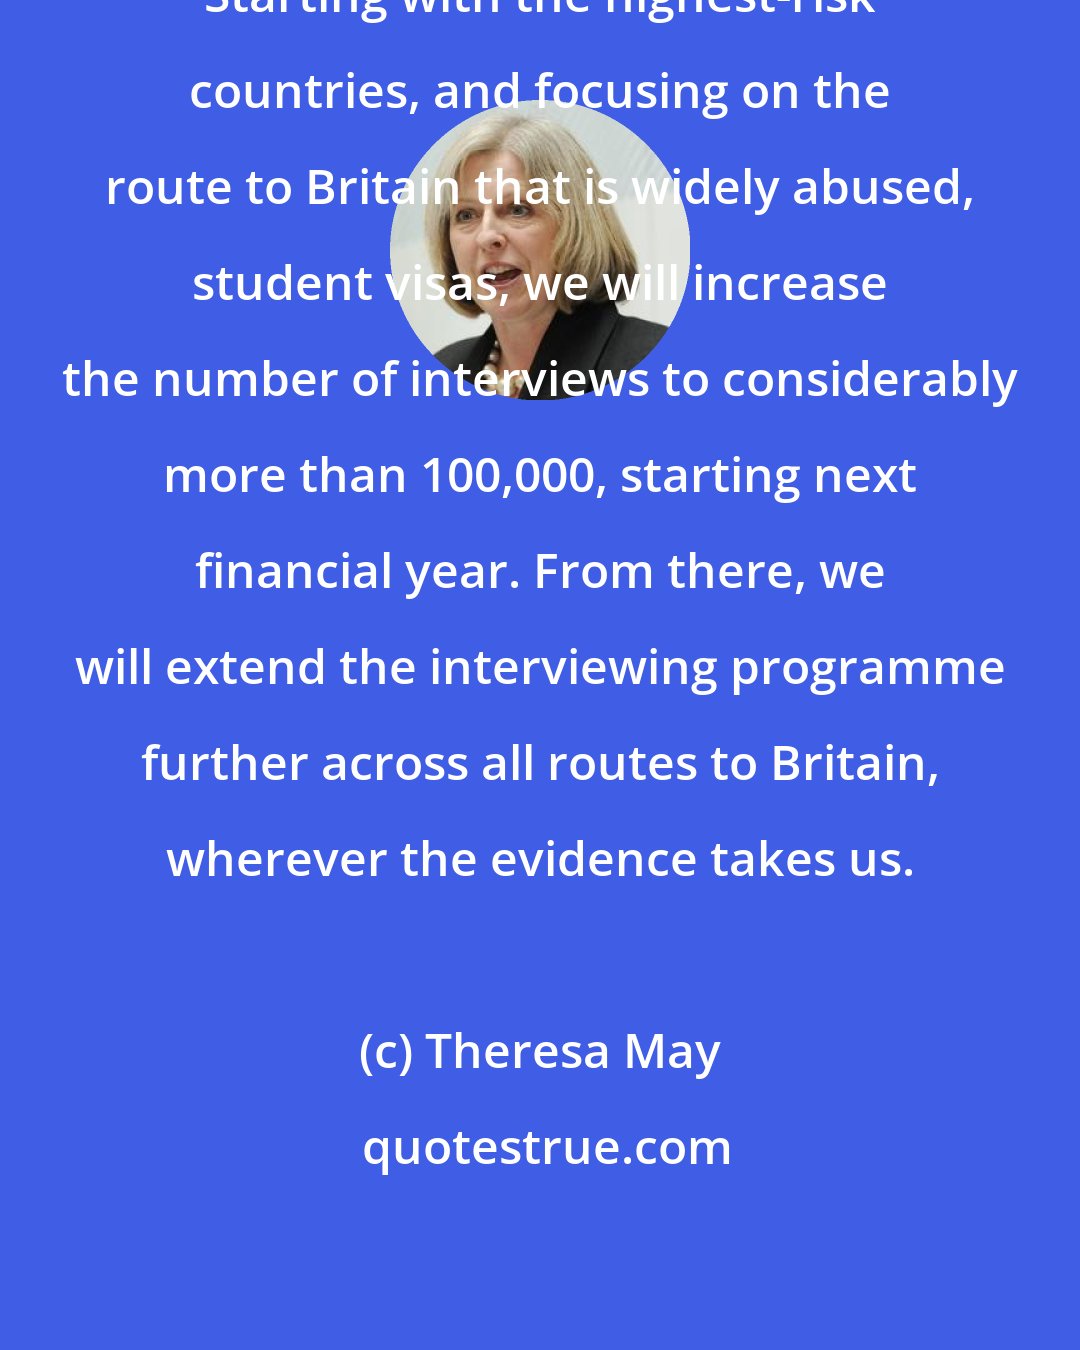 Theresa May: Starting with the highest-risk countries, and focusing on the route to Britain that is widely abused, student visas, we will increase the number of interviews to considerably more than 100,000, starting next financial year. From there, we will extend the interviewing programme further across all routes to Britain, wherever the evidence takes us.